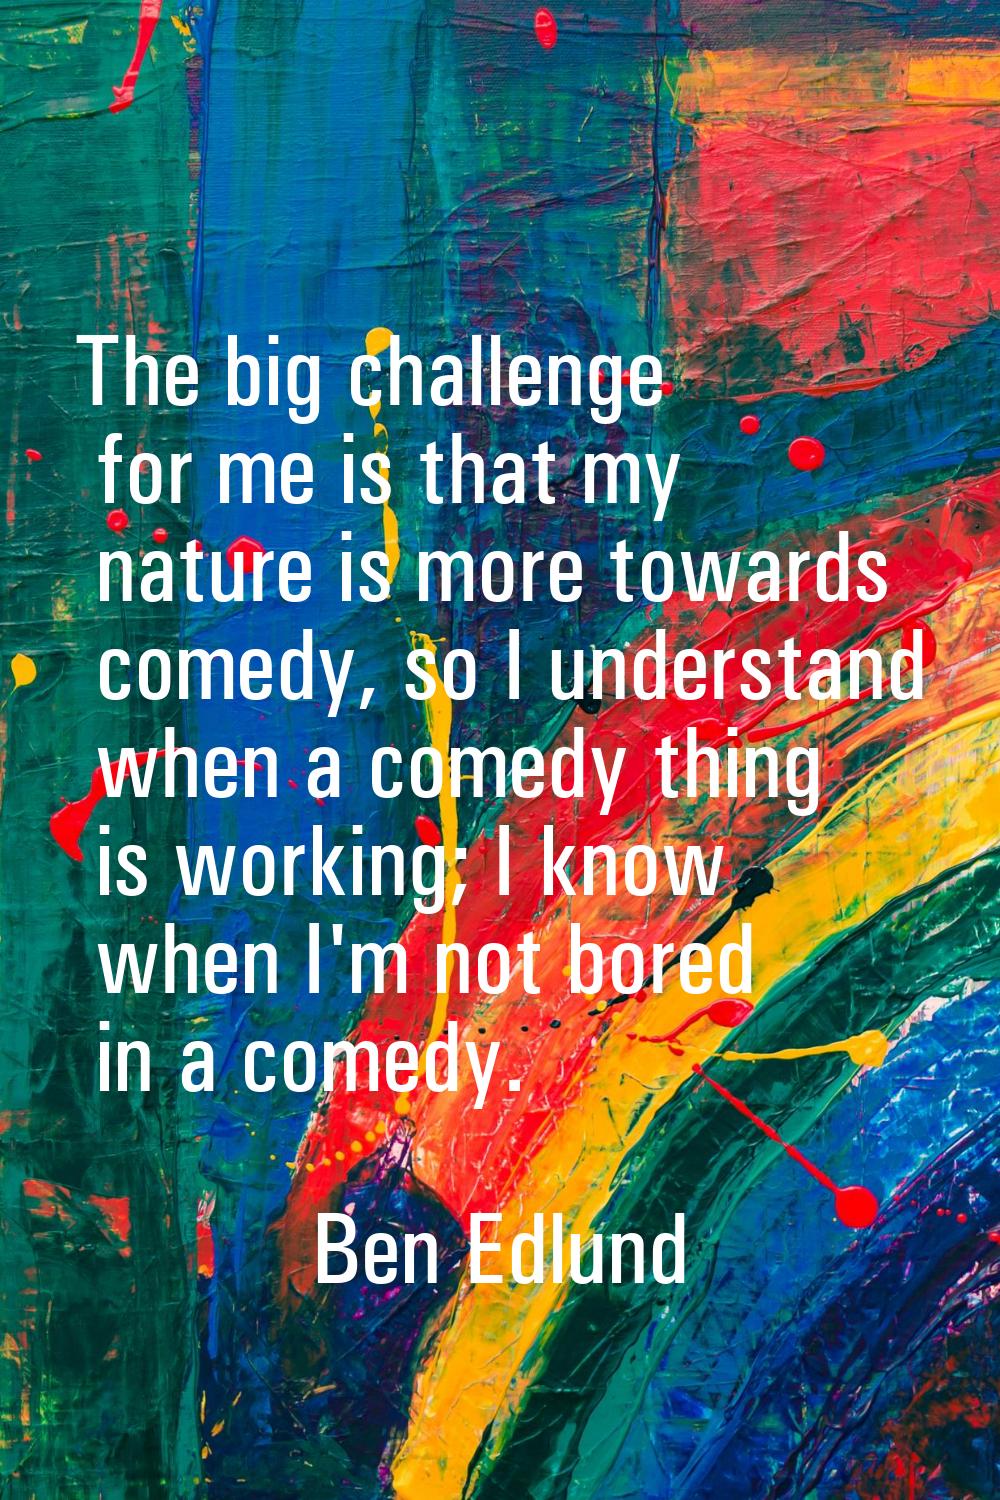 The big challenge for me is that my nature is more towards comedy, so I understand when a comedy th